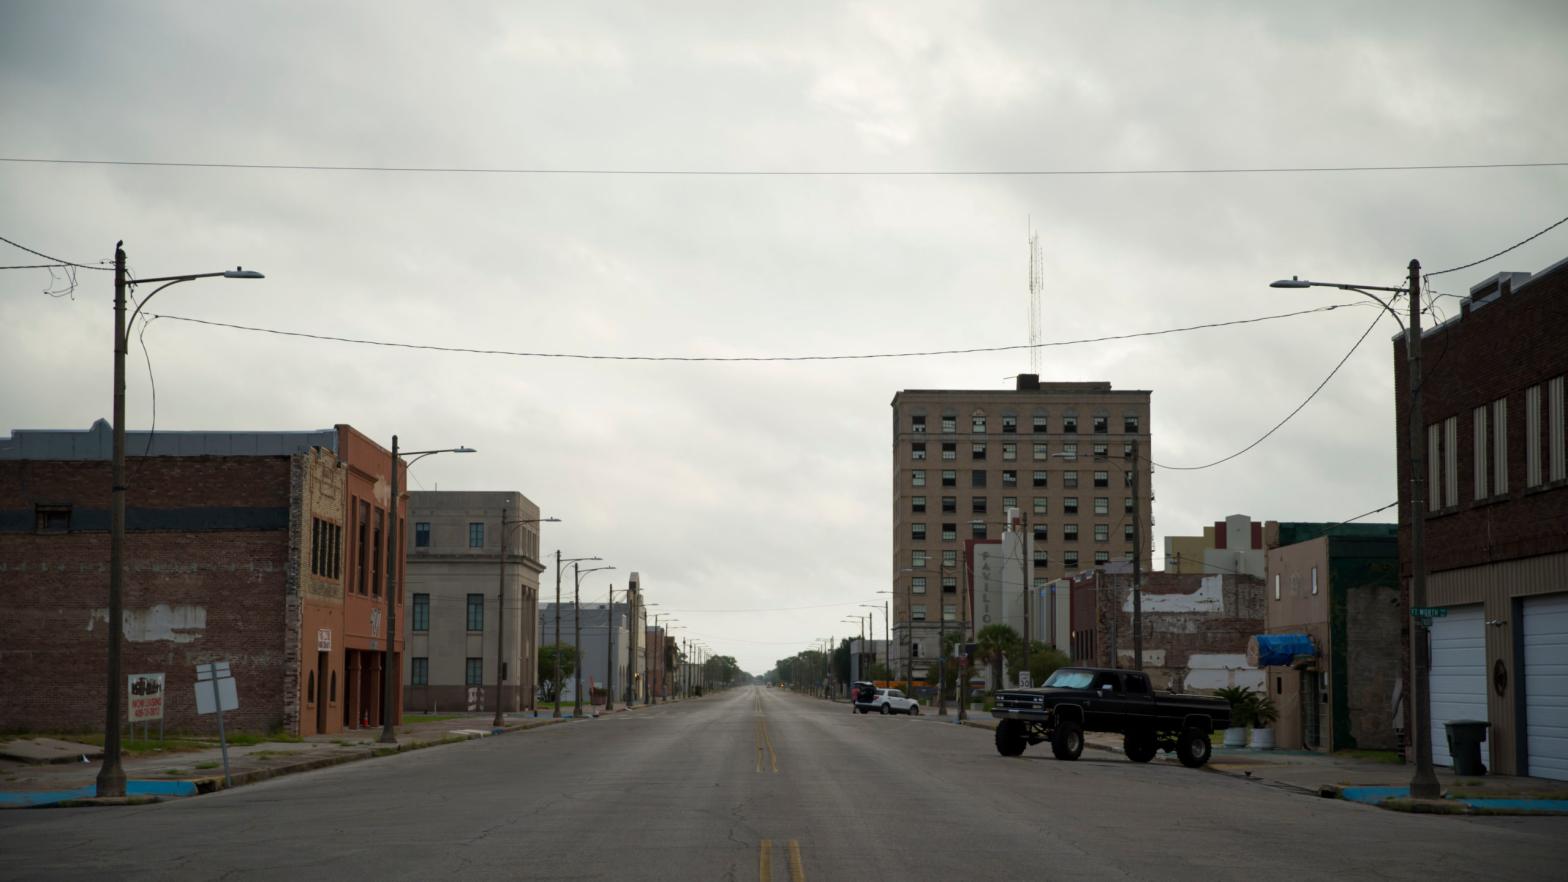 The downtown area of Port Arthur, Texas, is strangely quiet as evacuations are underway ahead of Hurricane Laura on August 26, 2020. (Photo: Eric Thayer, Getty Images)